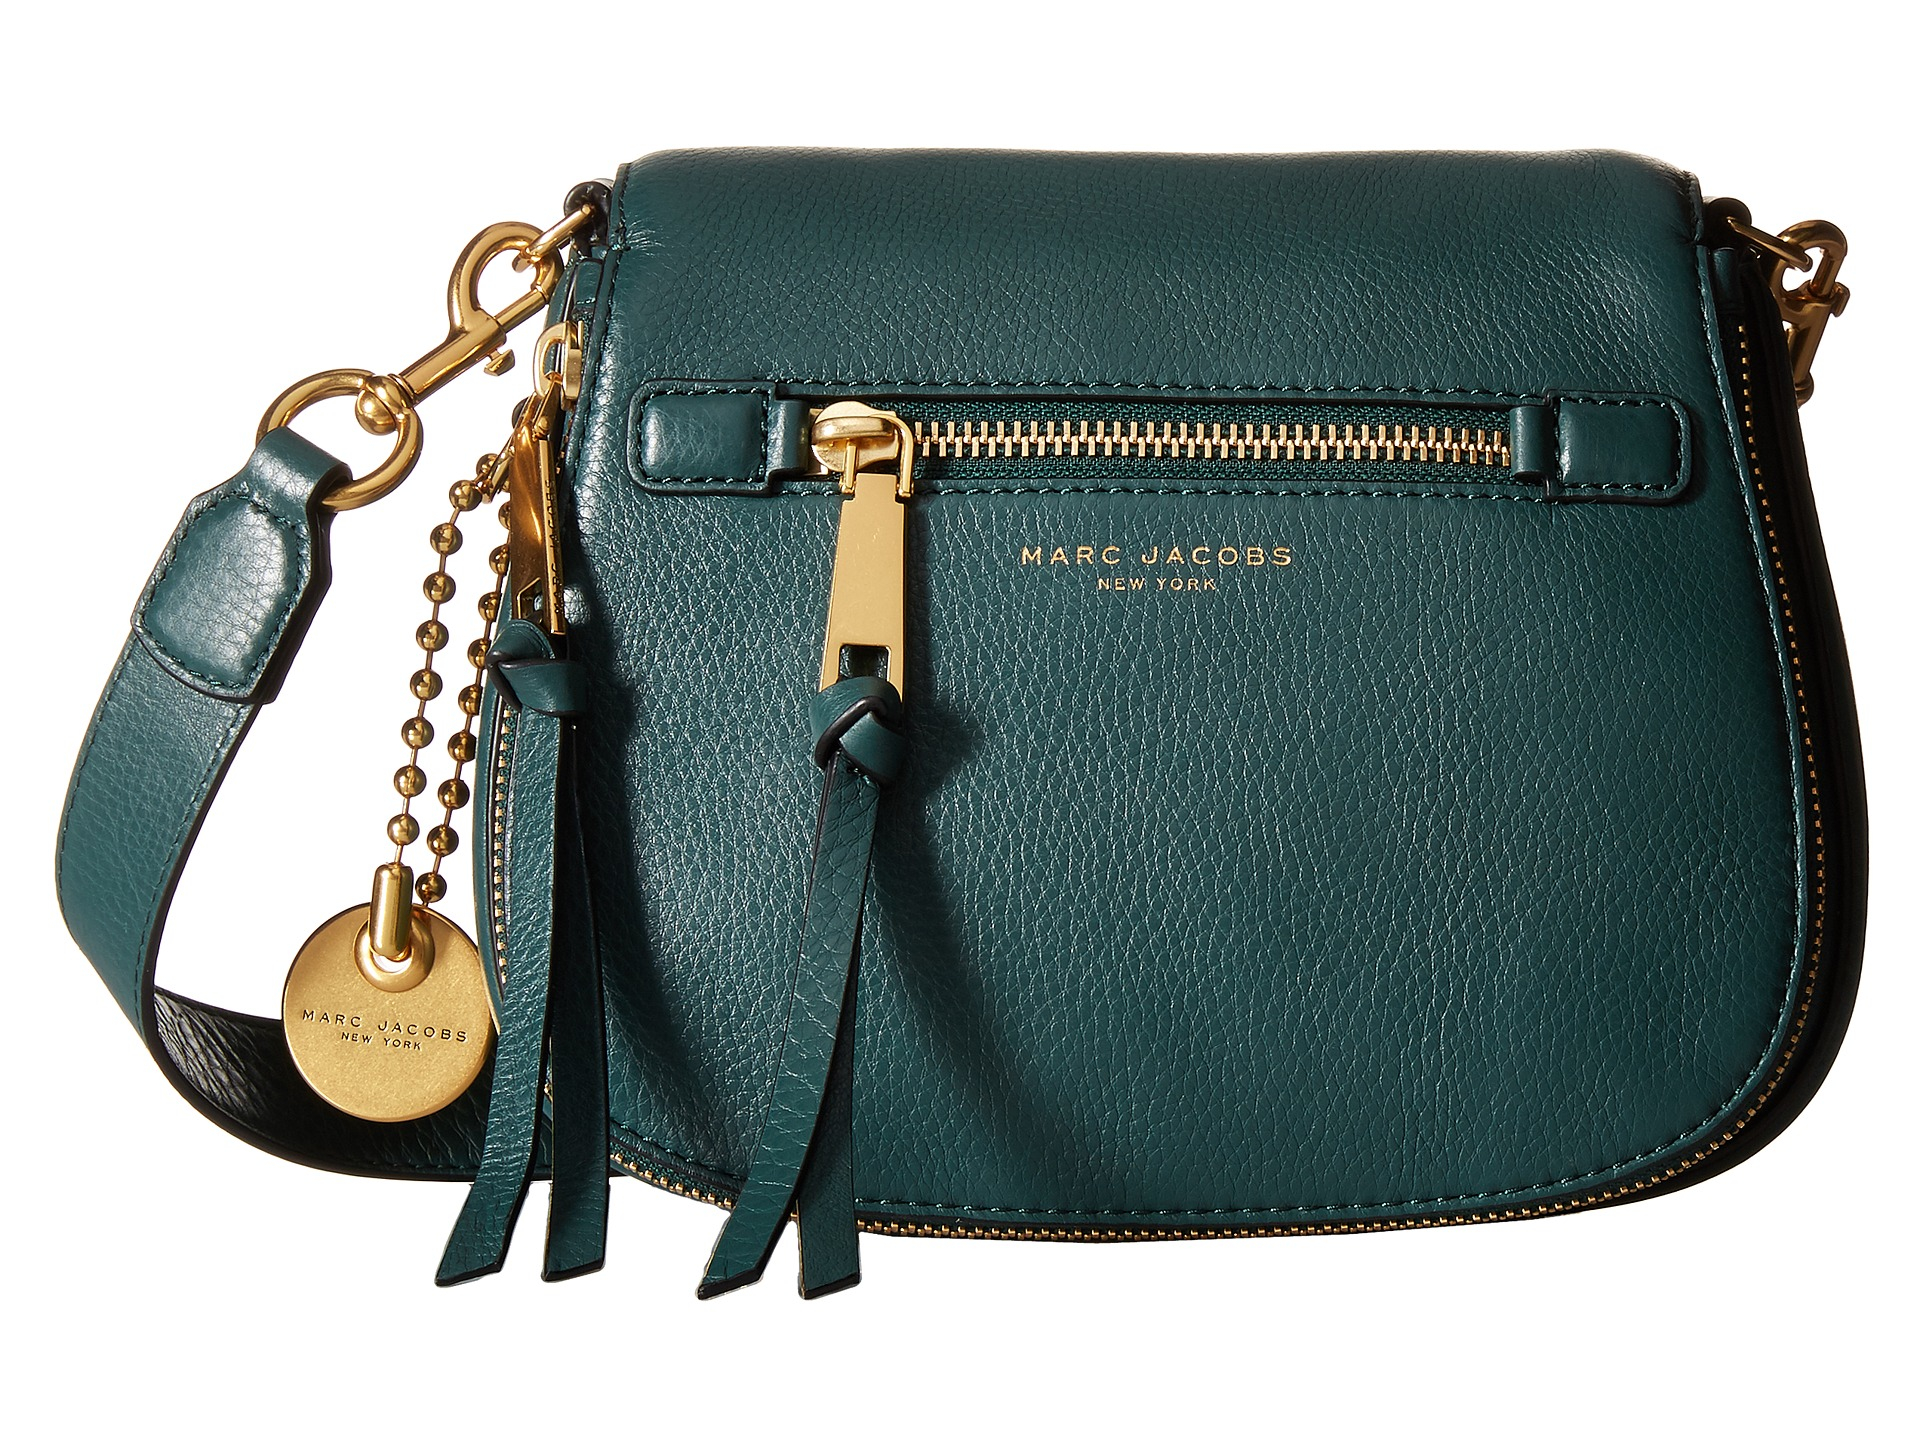 Lyst - Marc Jacobs Recruit Small Saddle Bag in Green